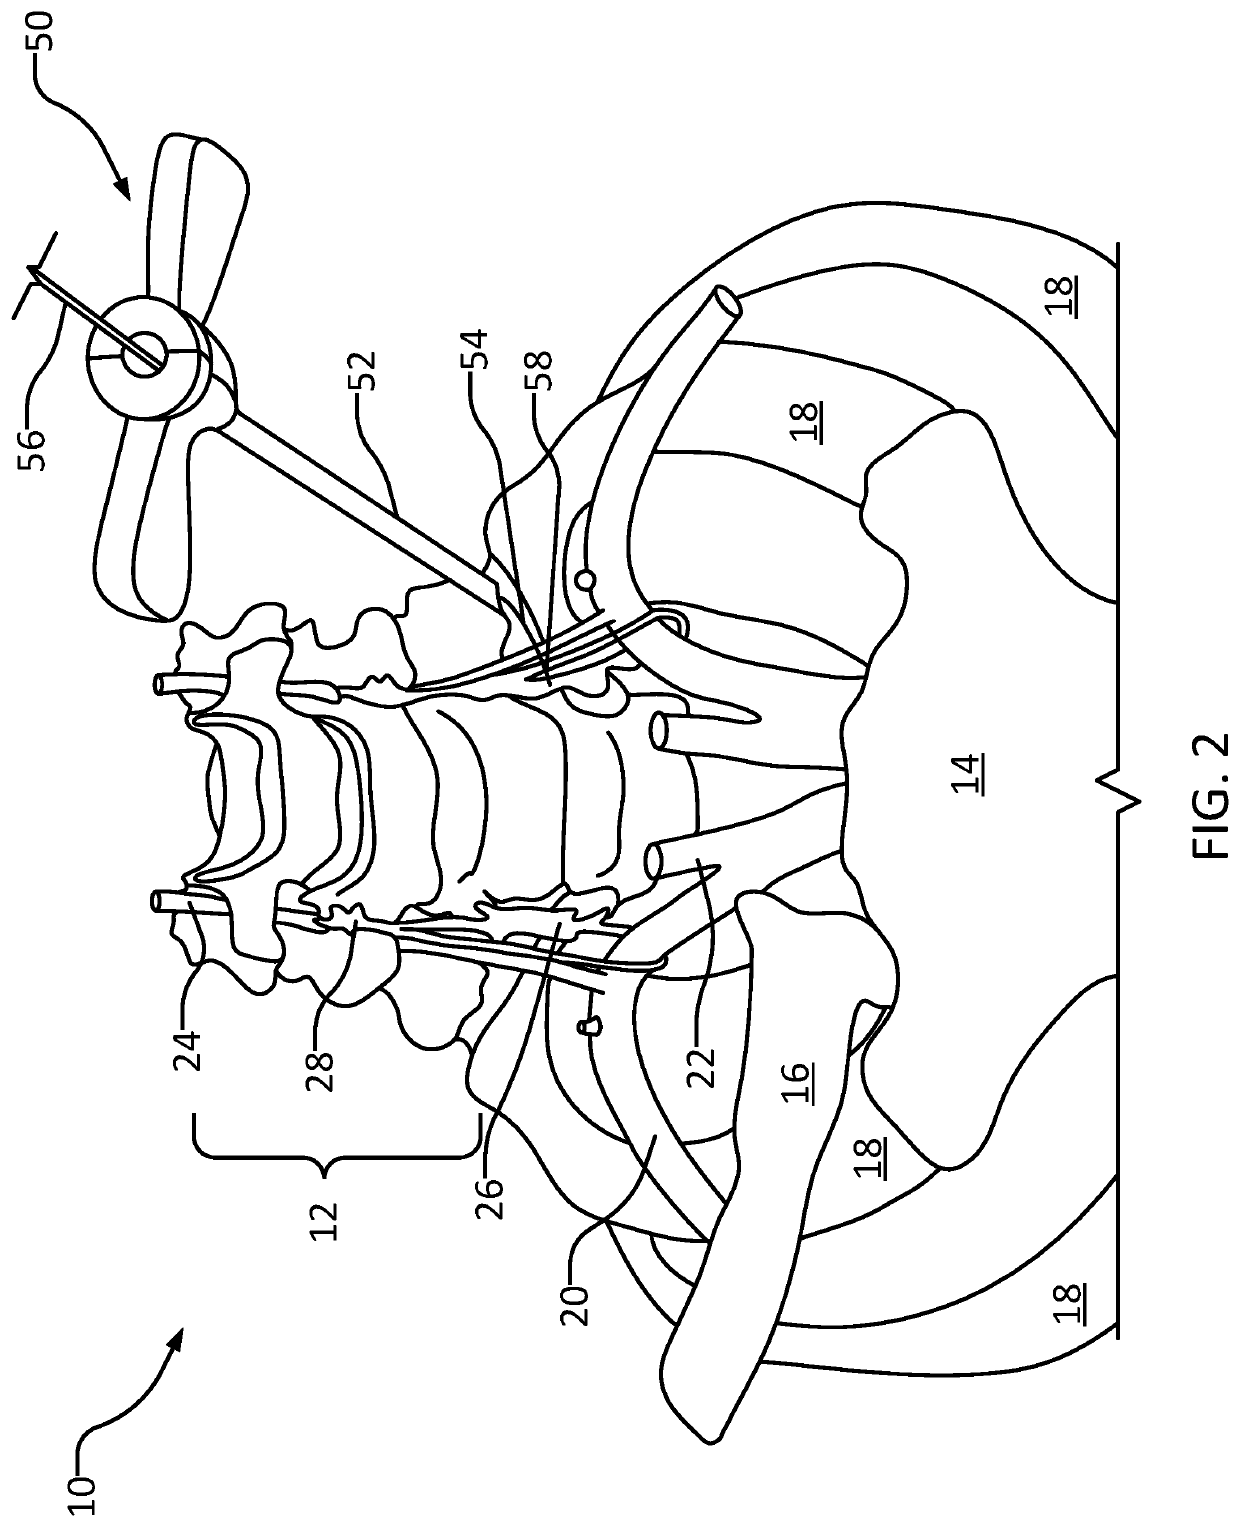 Systems and methods for stellate ganglion simulation and ablation